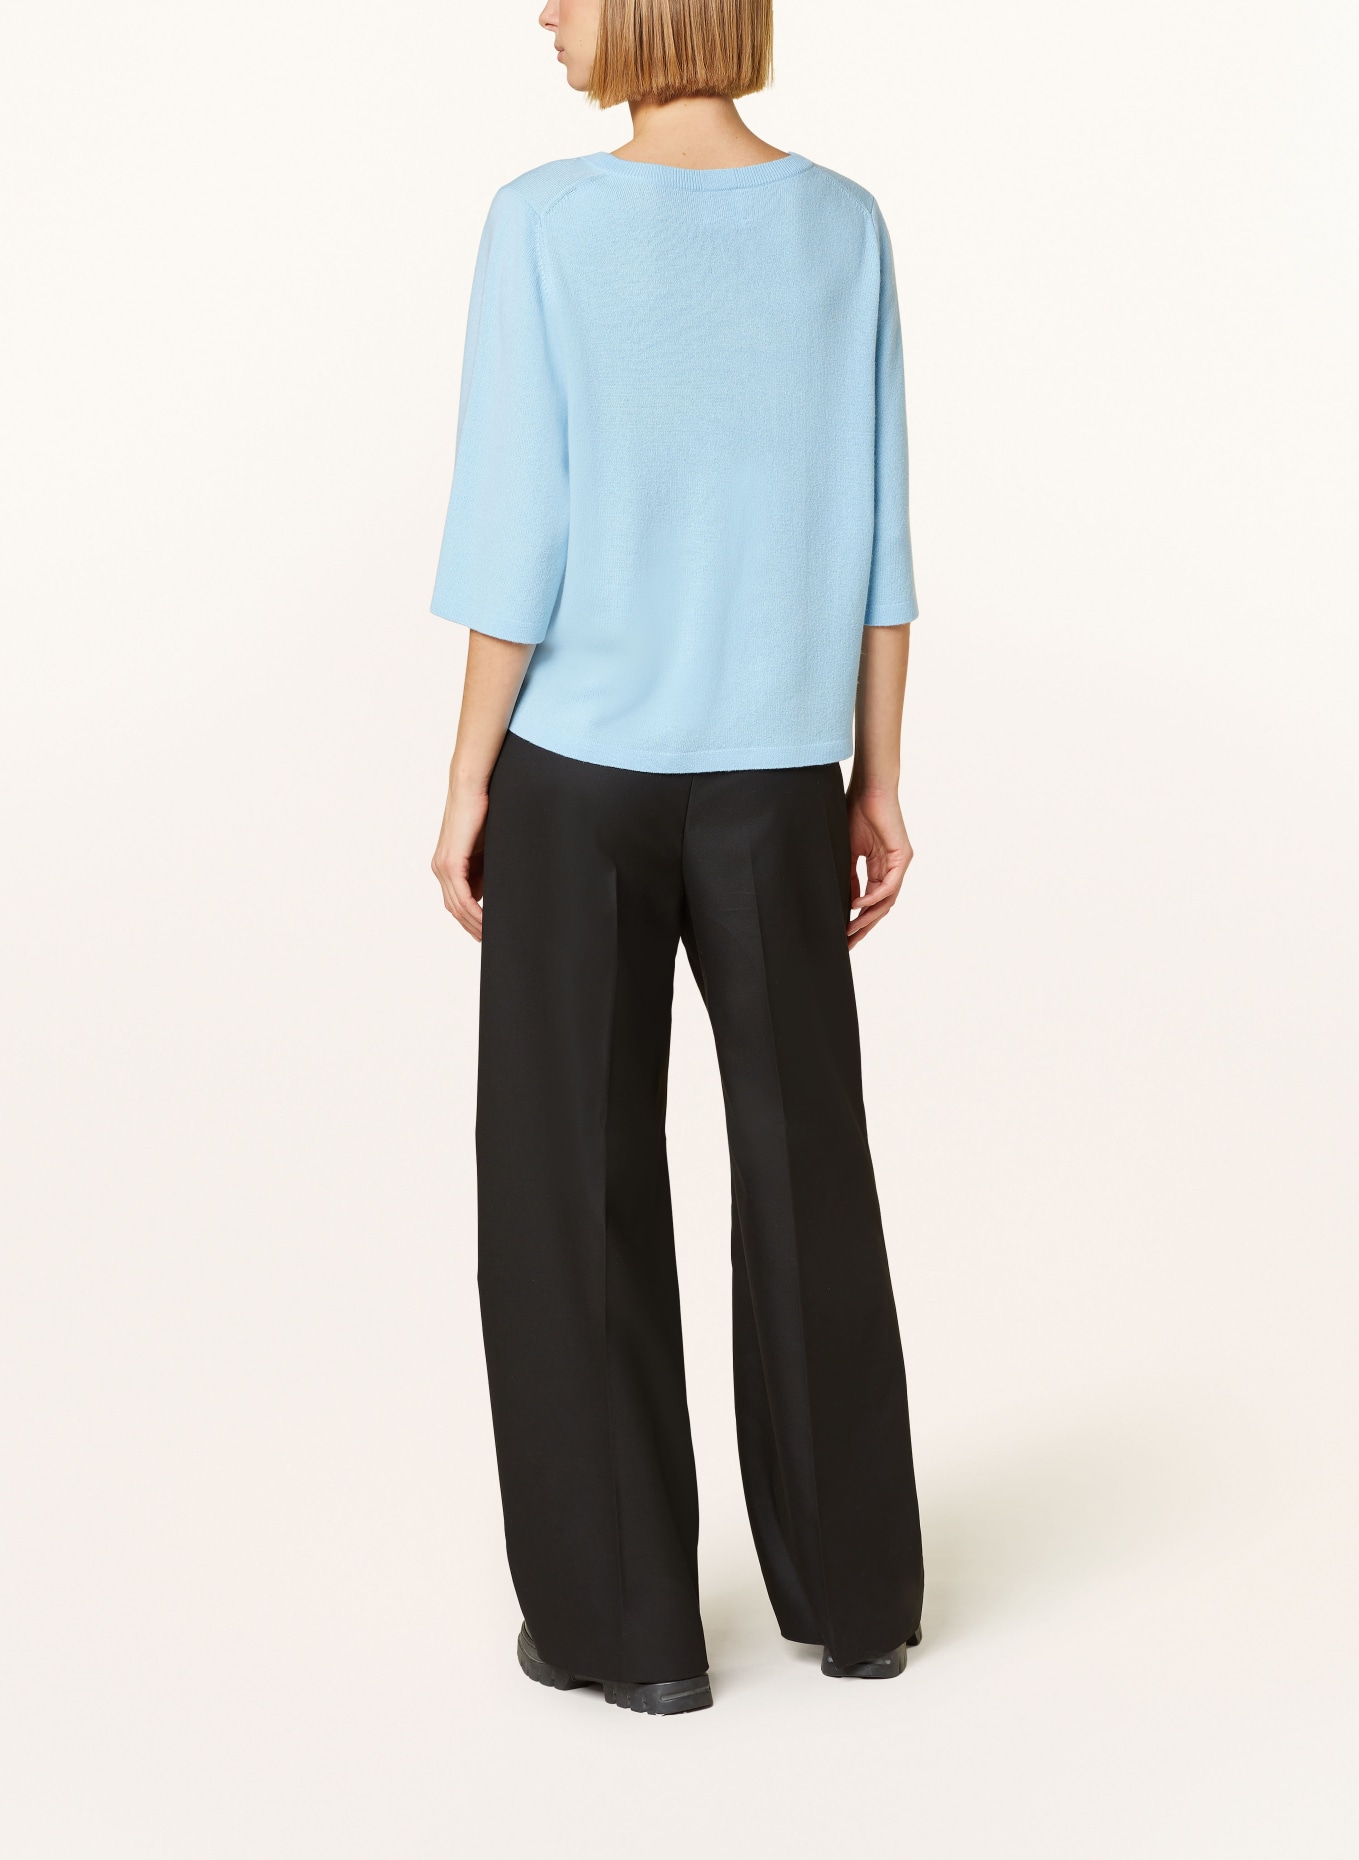 ALLUDE Sweater with cashmere and 3/4 sleeves, Color: LIGHT BLUE (Image 3)